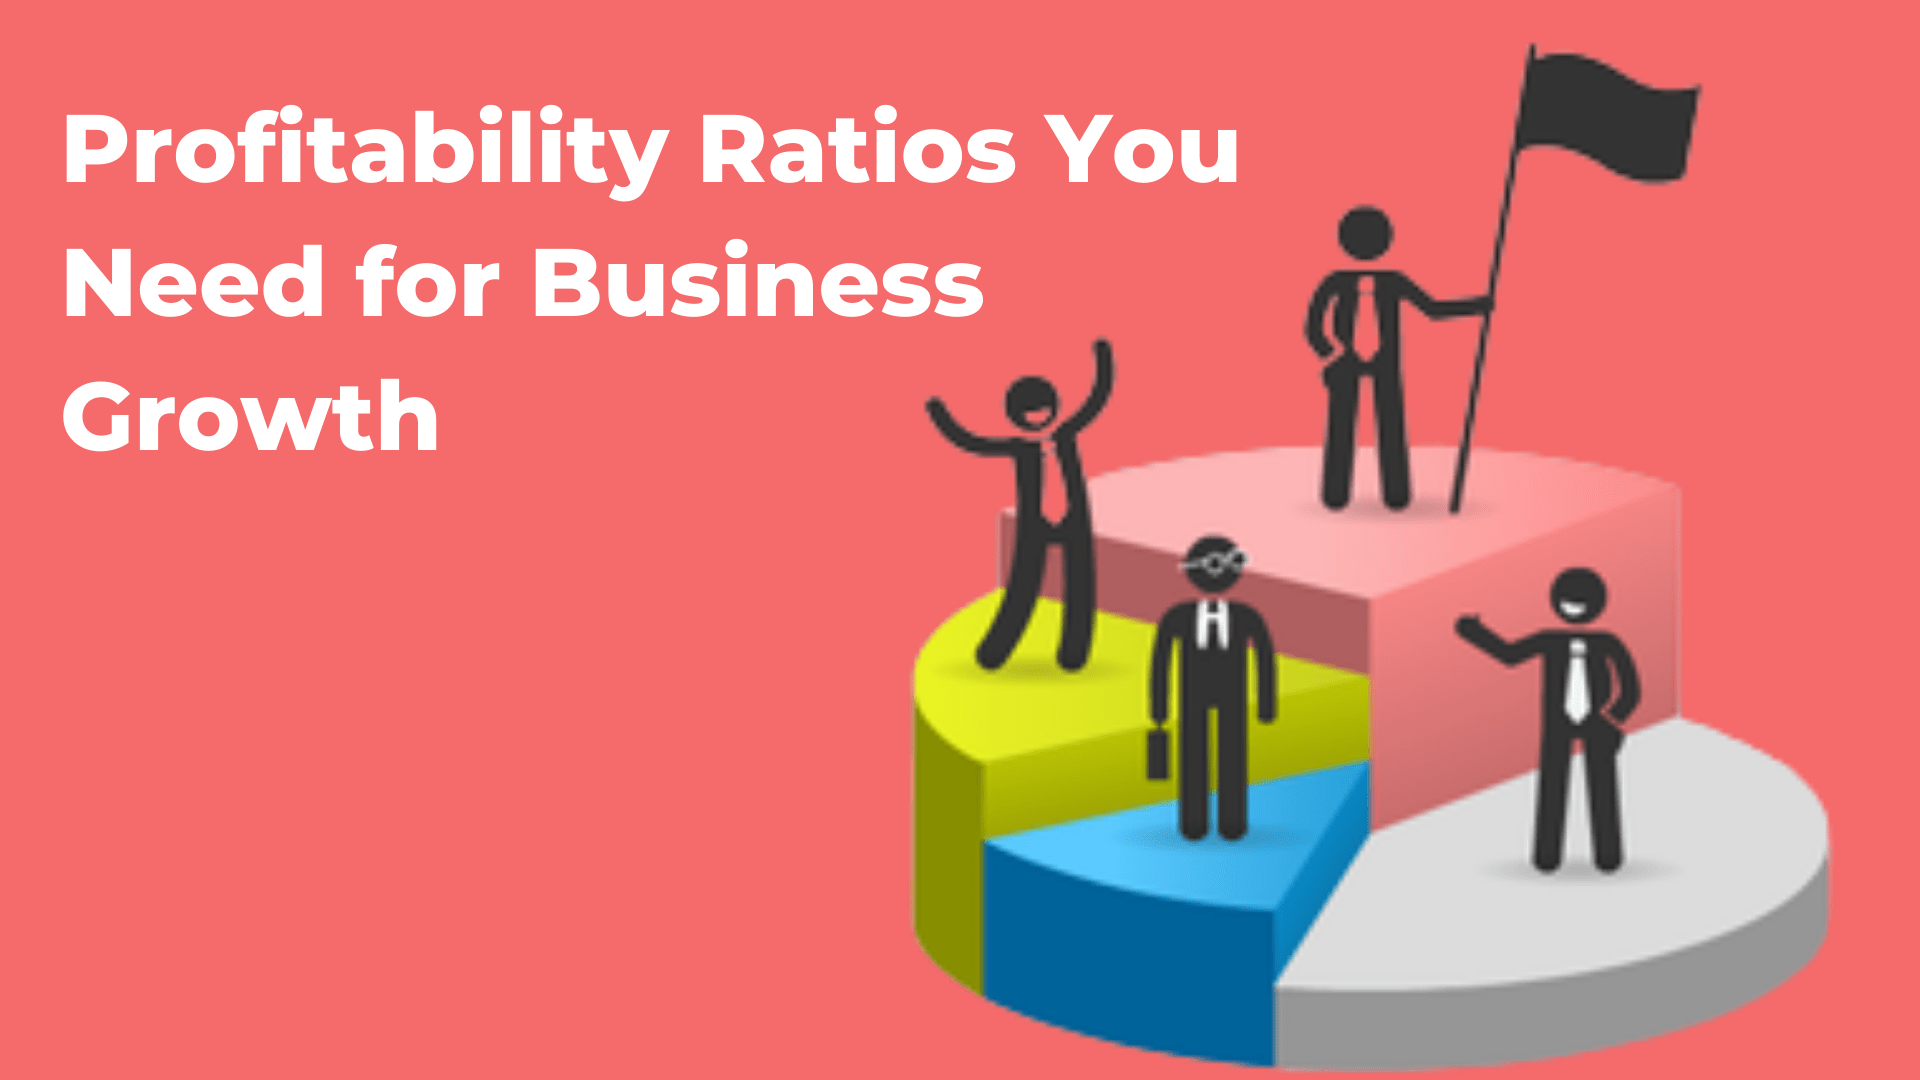 Profitability Ratios You Need for Business Growth